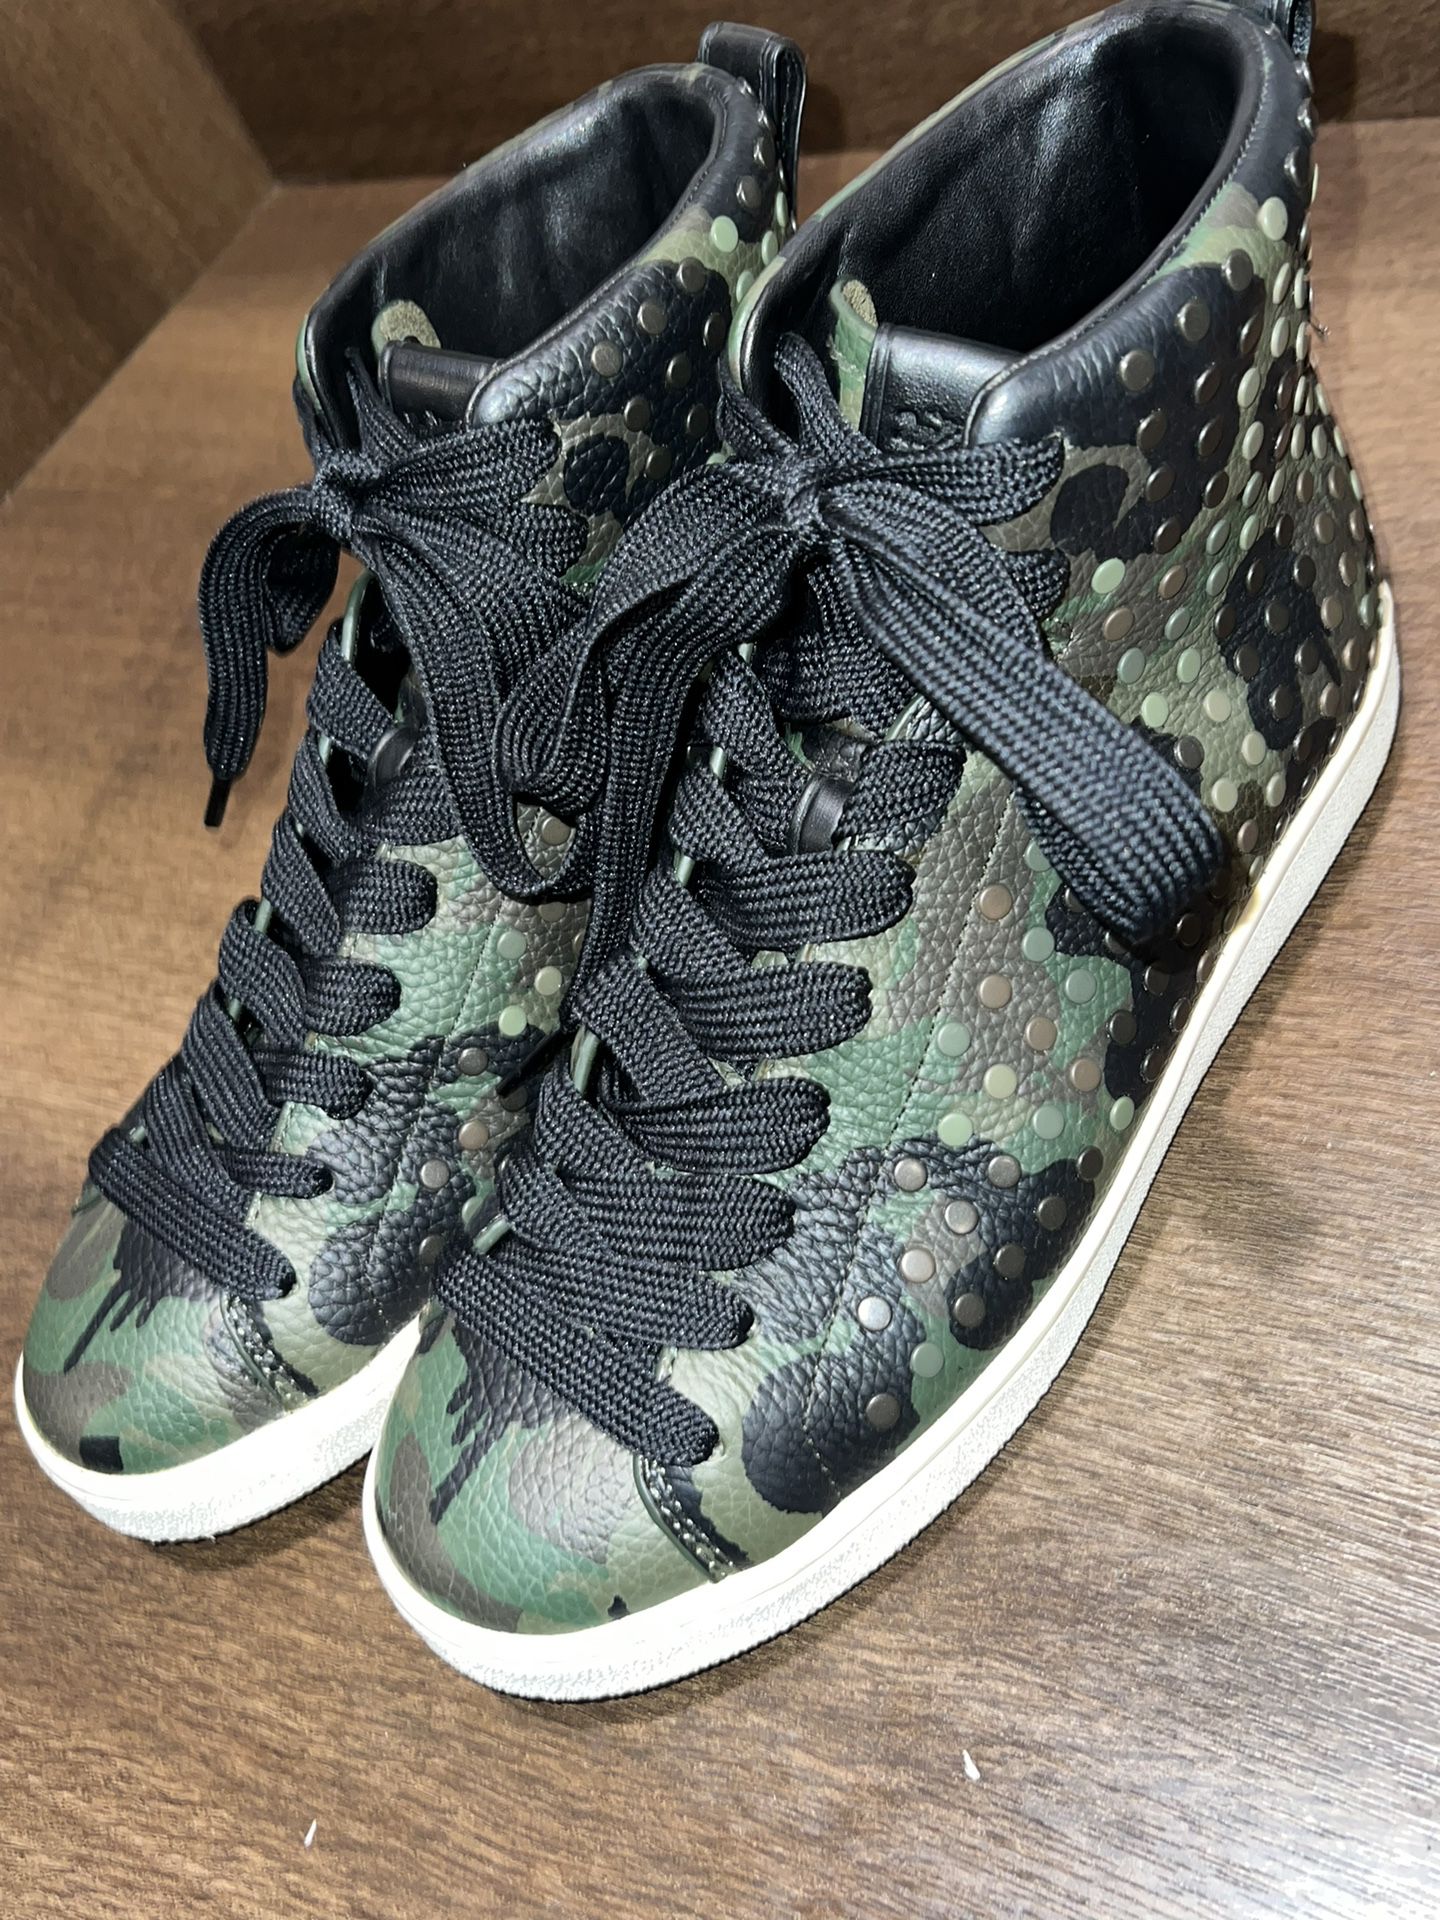  COACH Wild Beast Print / Camo And Studs High Top Sneakers Mens Shoes